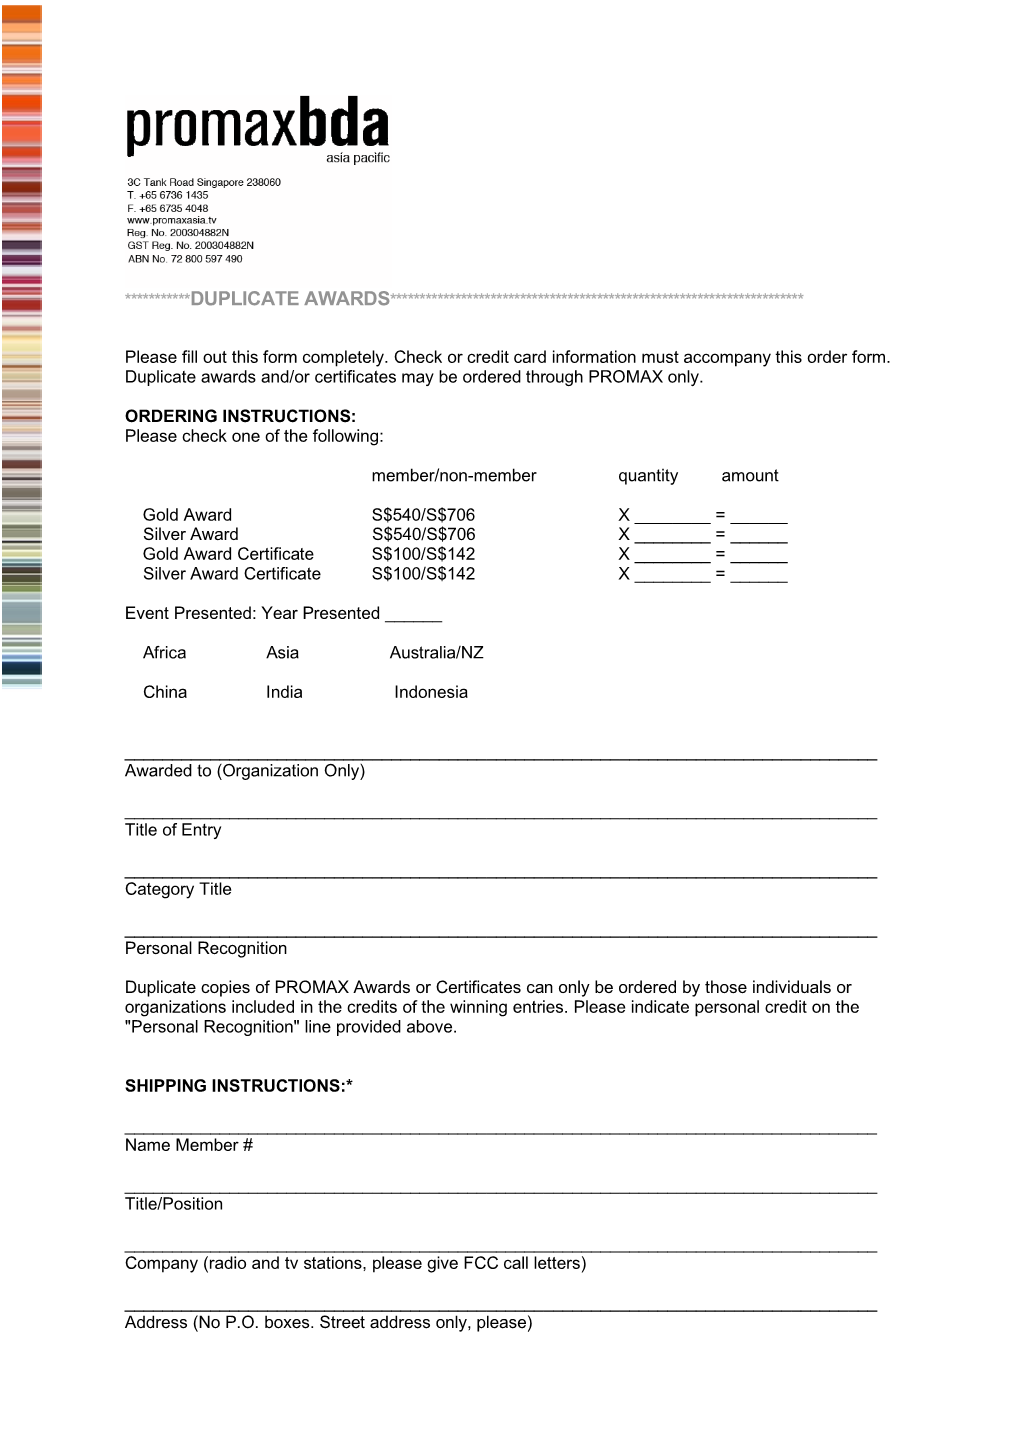 Please Fill out This Form Completely. Check Or Credit Card Information Must Accompany This Order Form